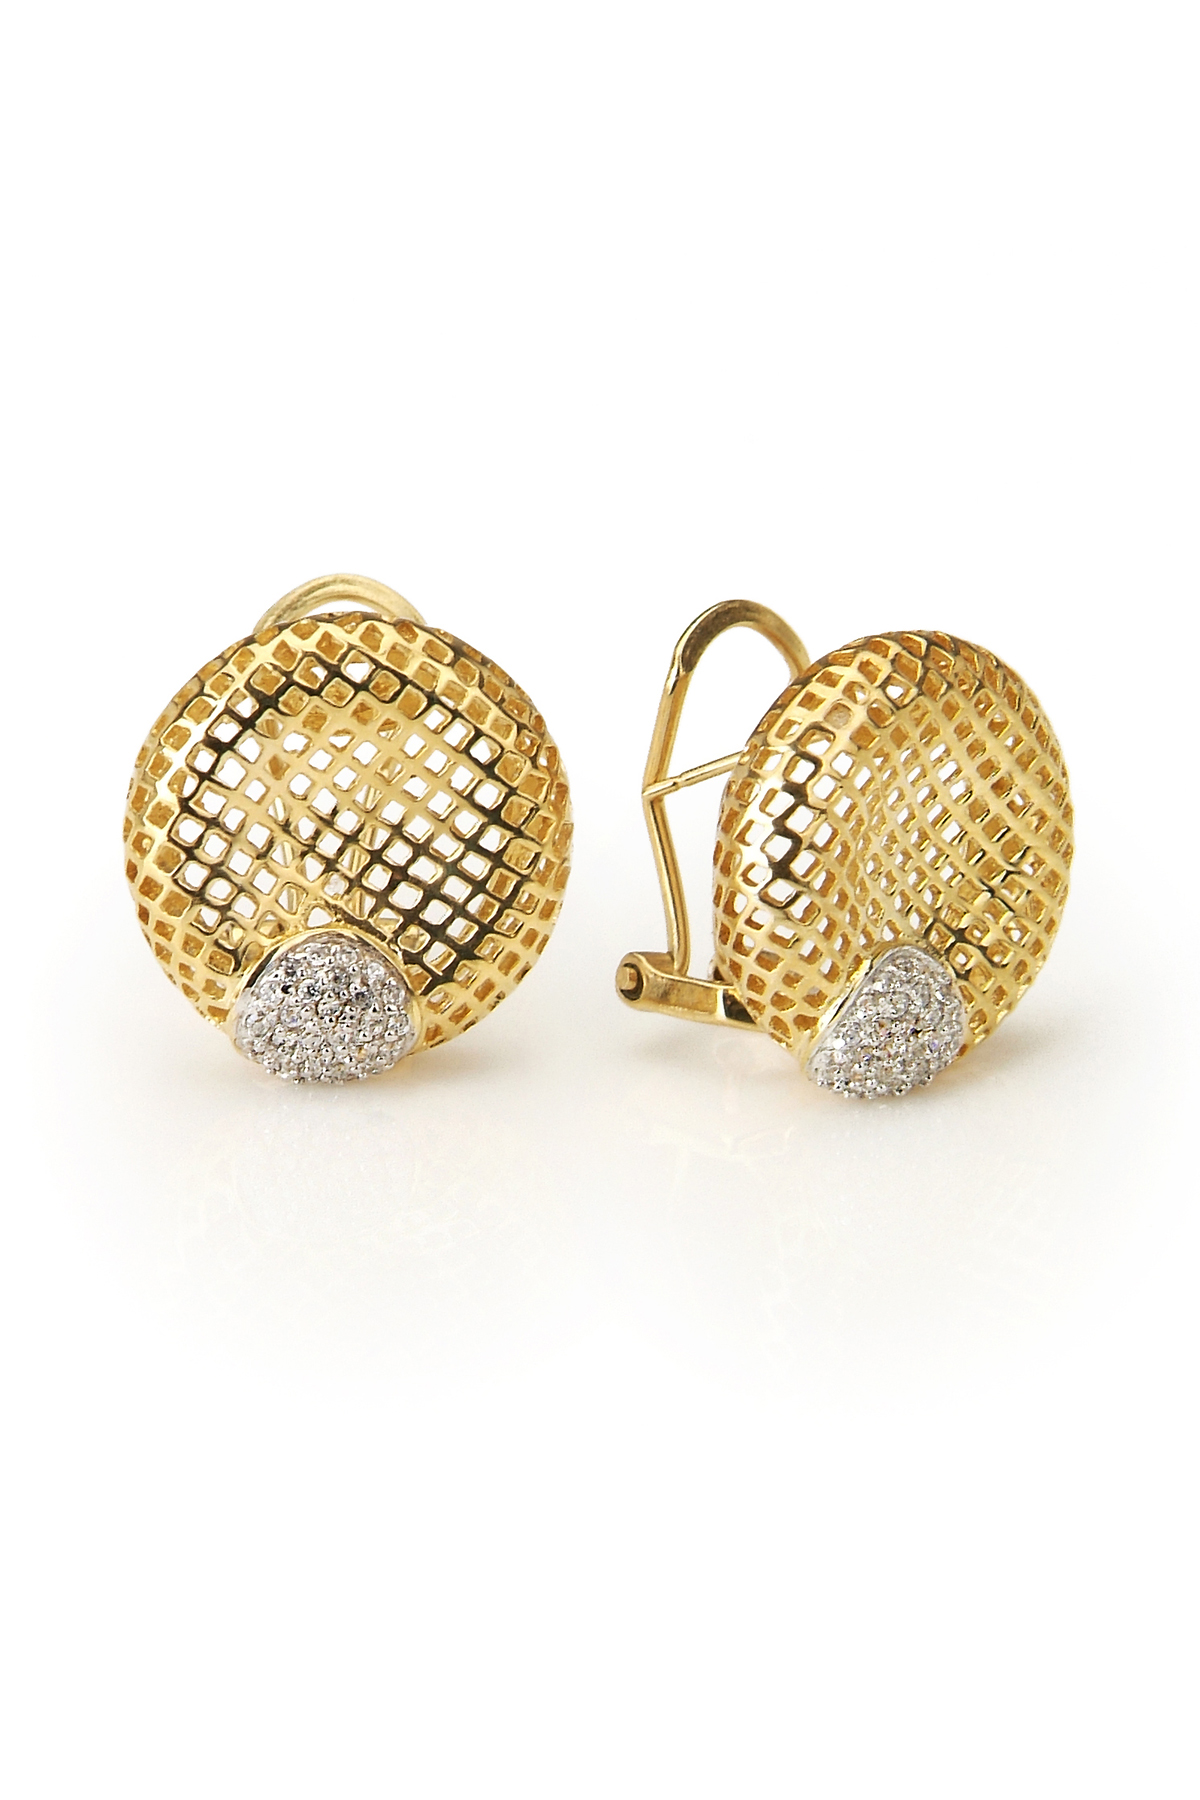 Cubic Zirconia (.925) Sterling Silver Gold Plated Lace Round Earrings